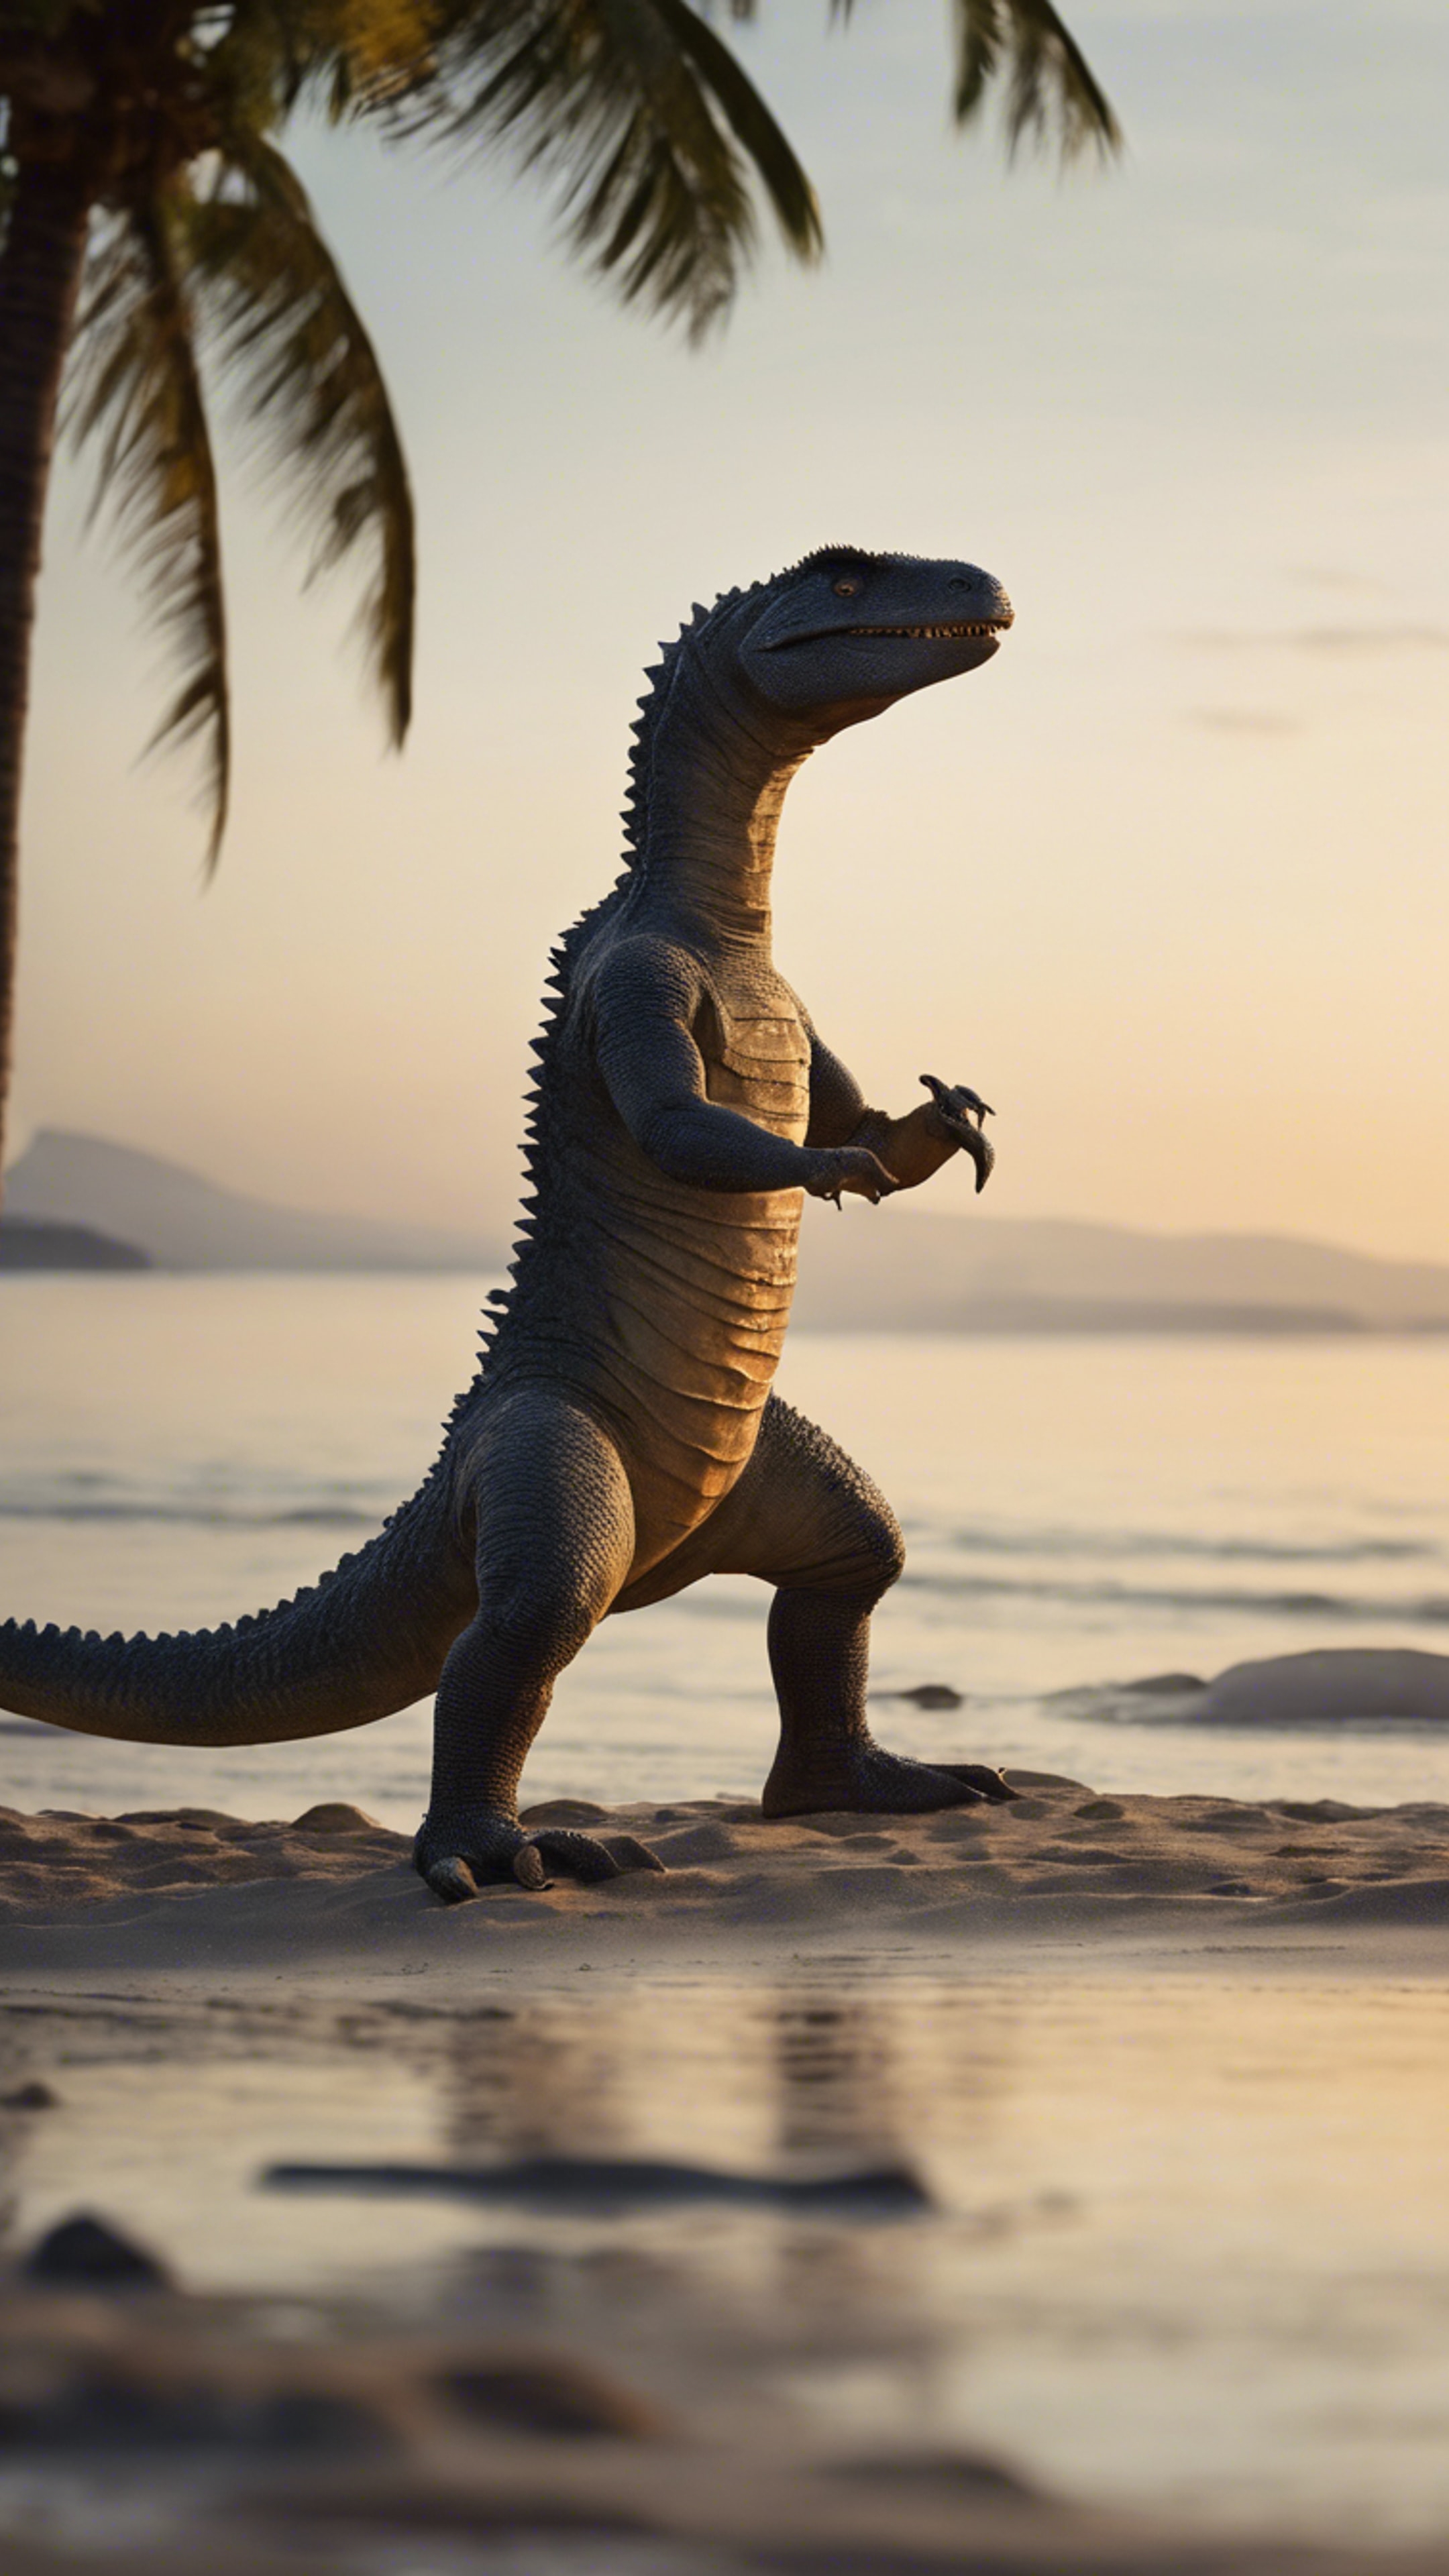 A tranquil scene of Thescelosaurus practicing Tai-Chi during the early dawn on a peaceful beach. Шпалери[4138bc2c7b604ba6814f]